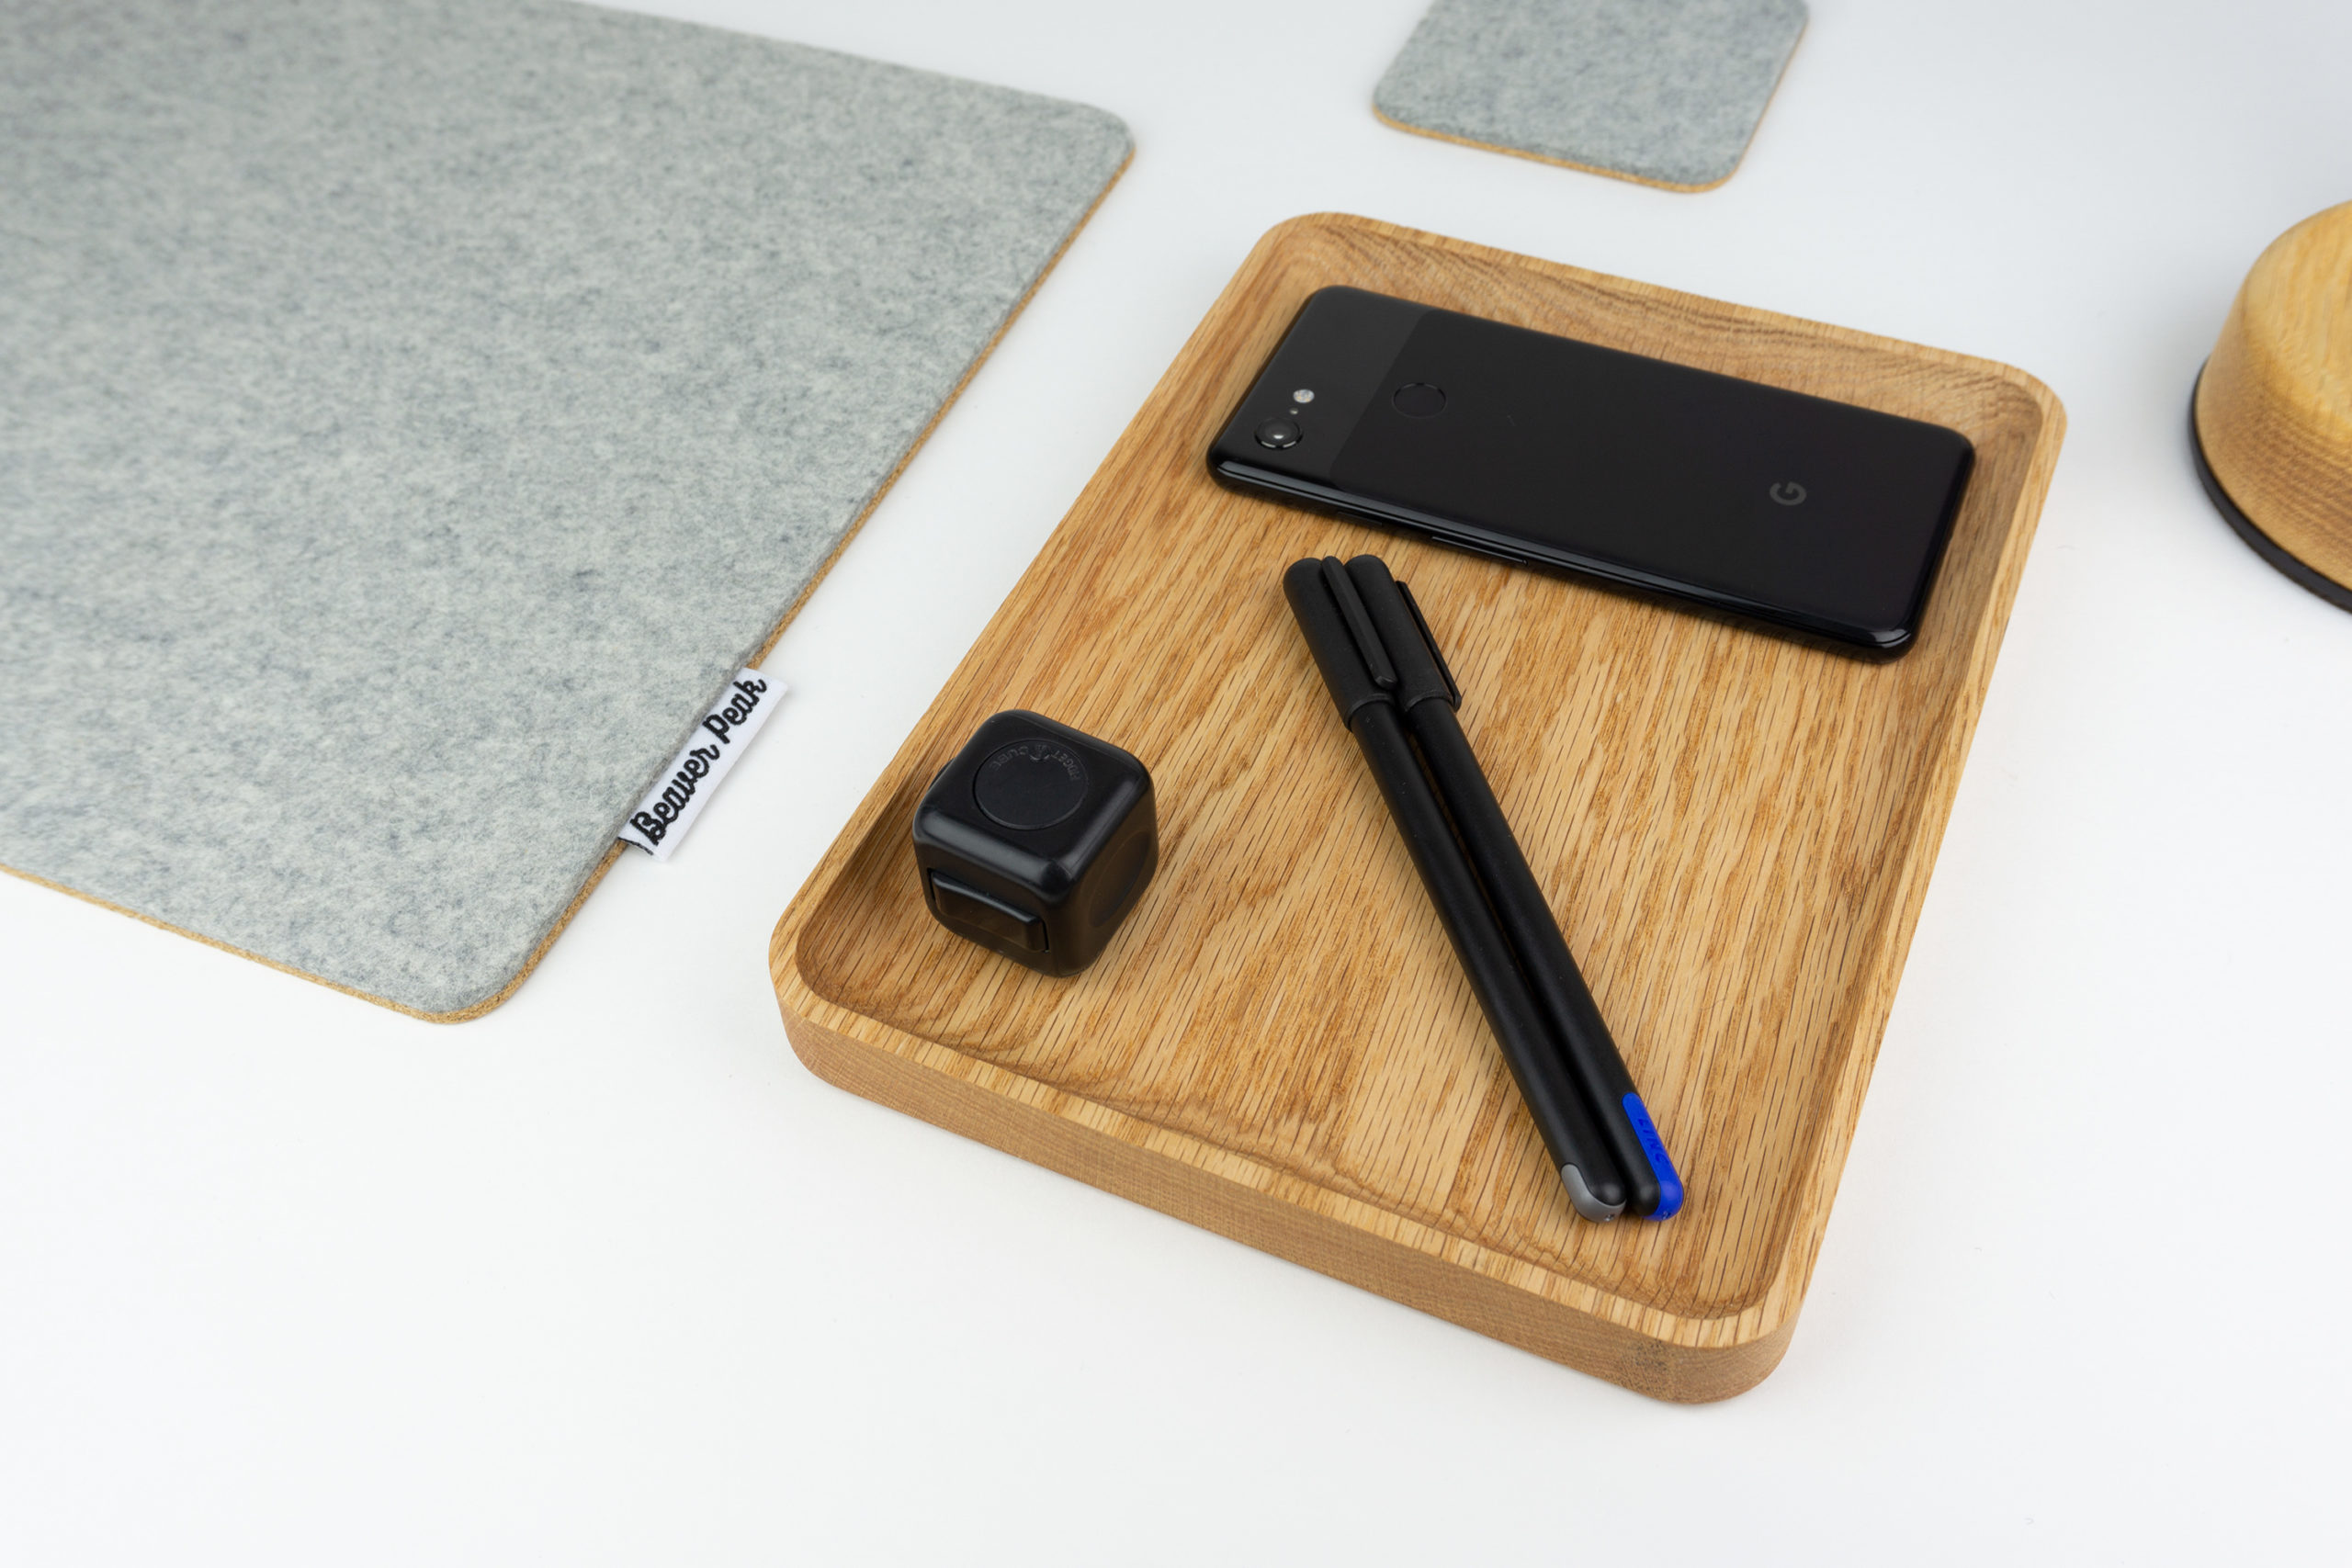 Wood desk tray with phone and pens